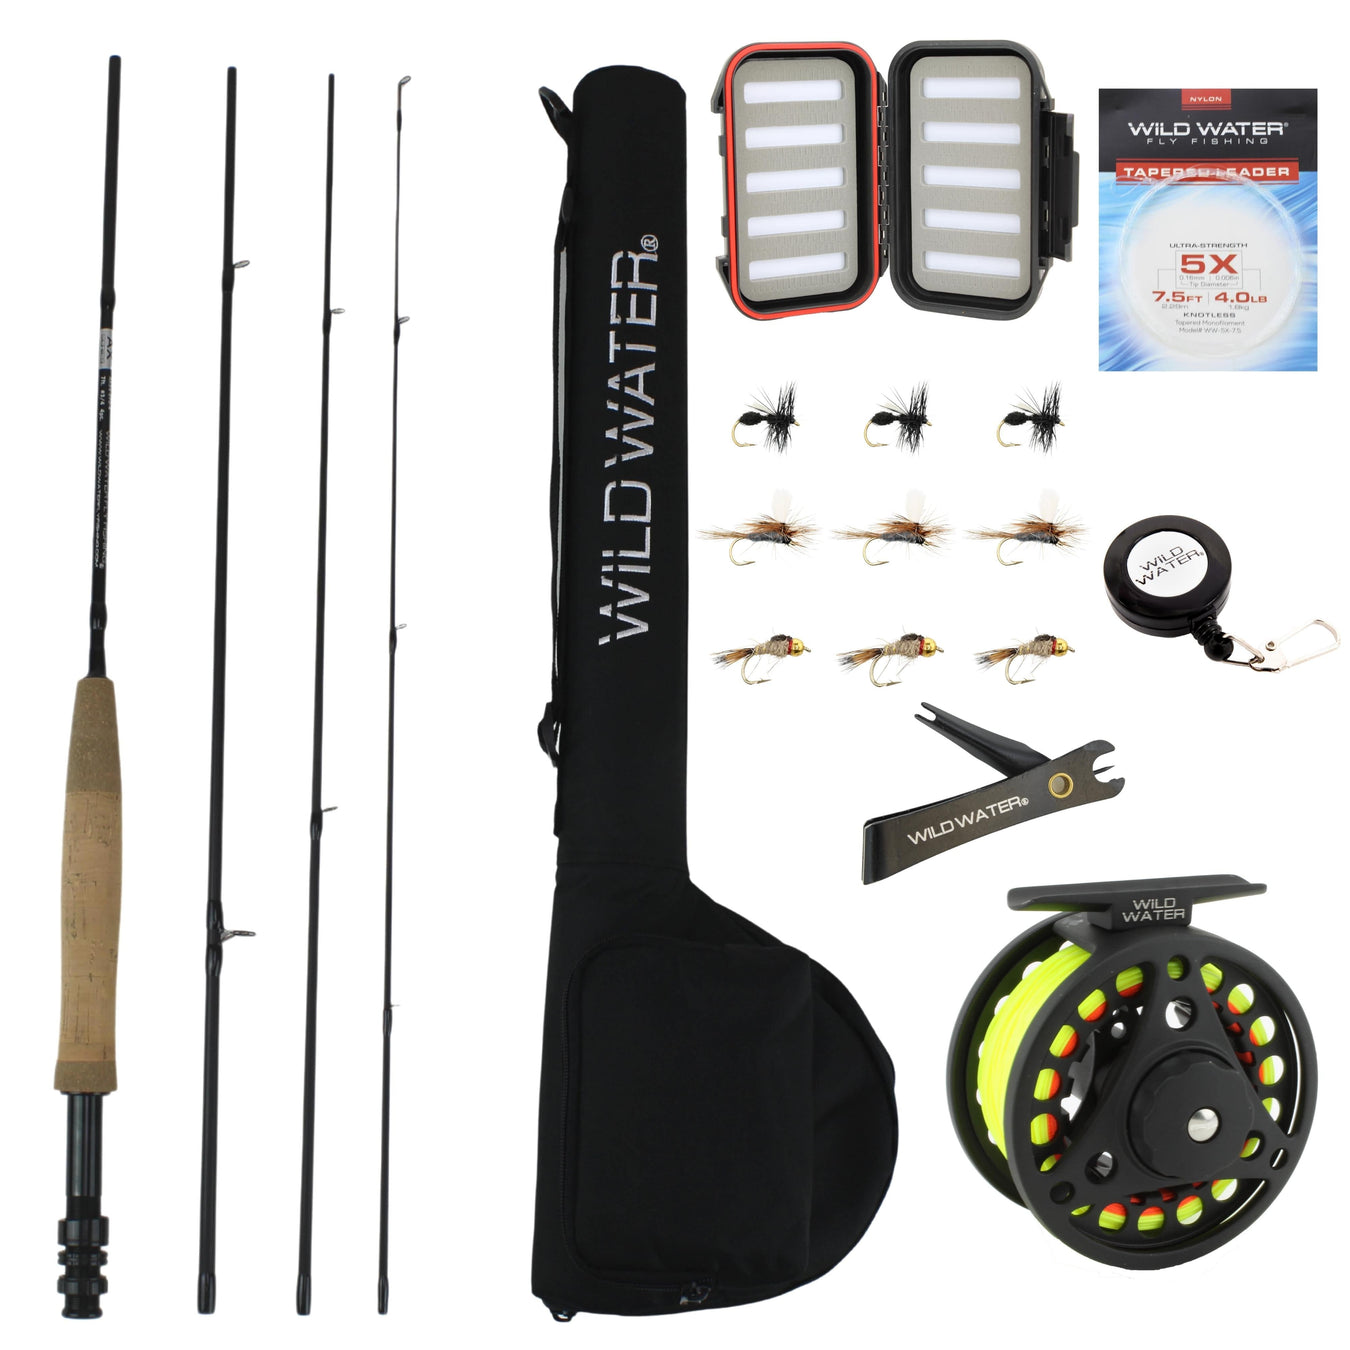 4-Weight Fly Fishing Kits